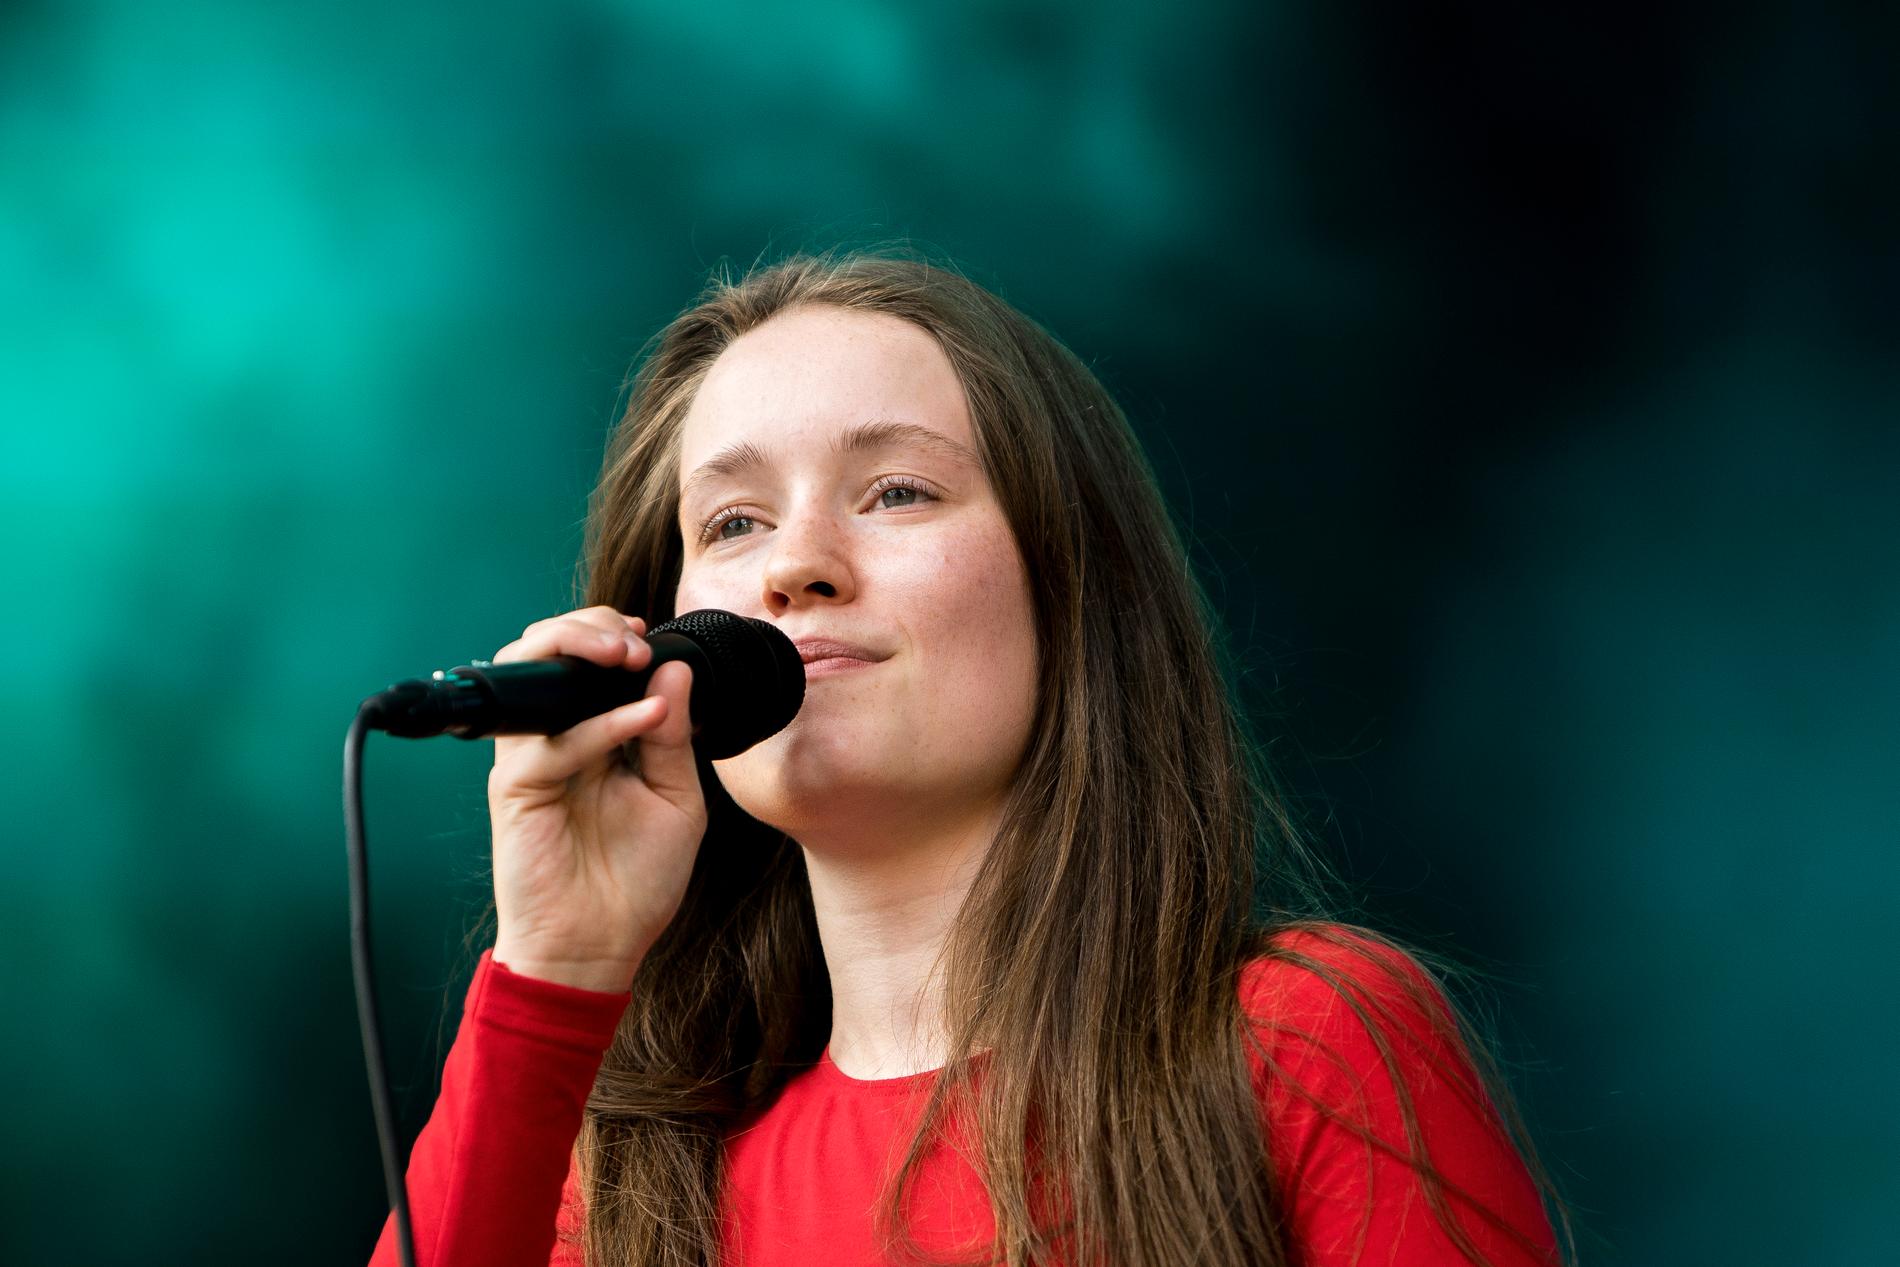 Sigrid entered the top ten in the UK